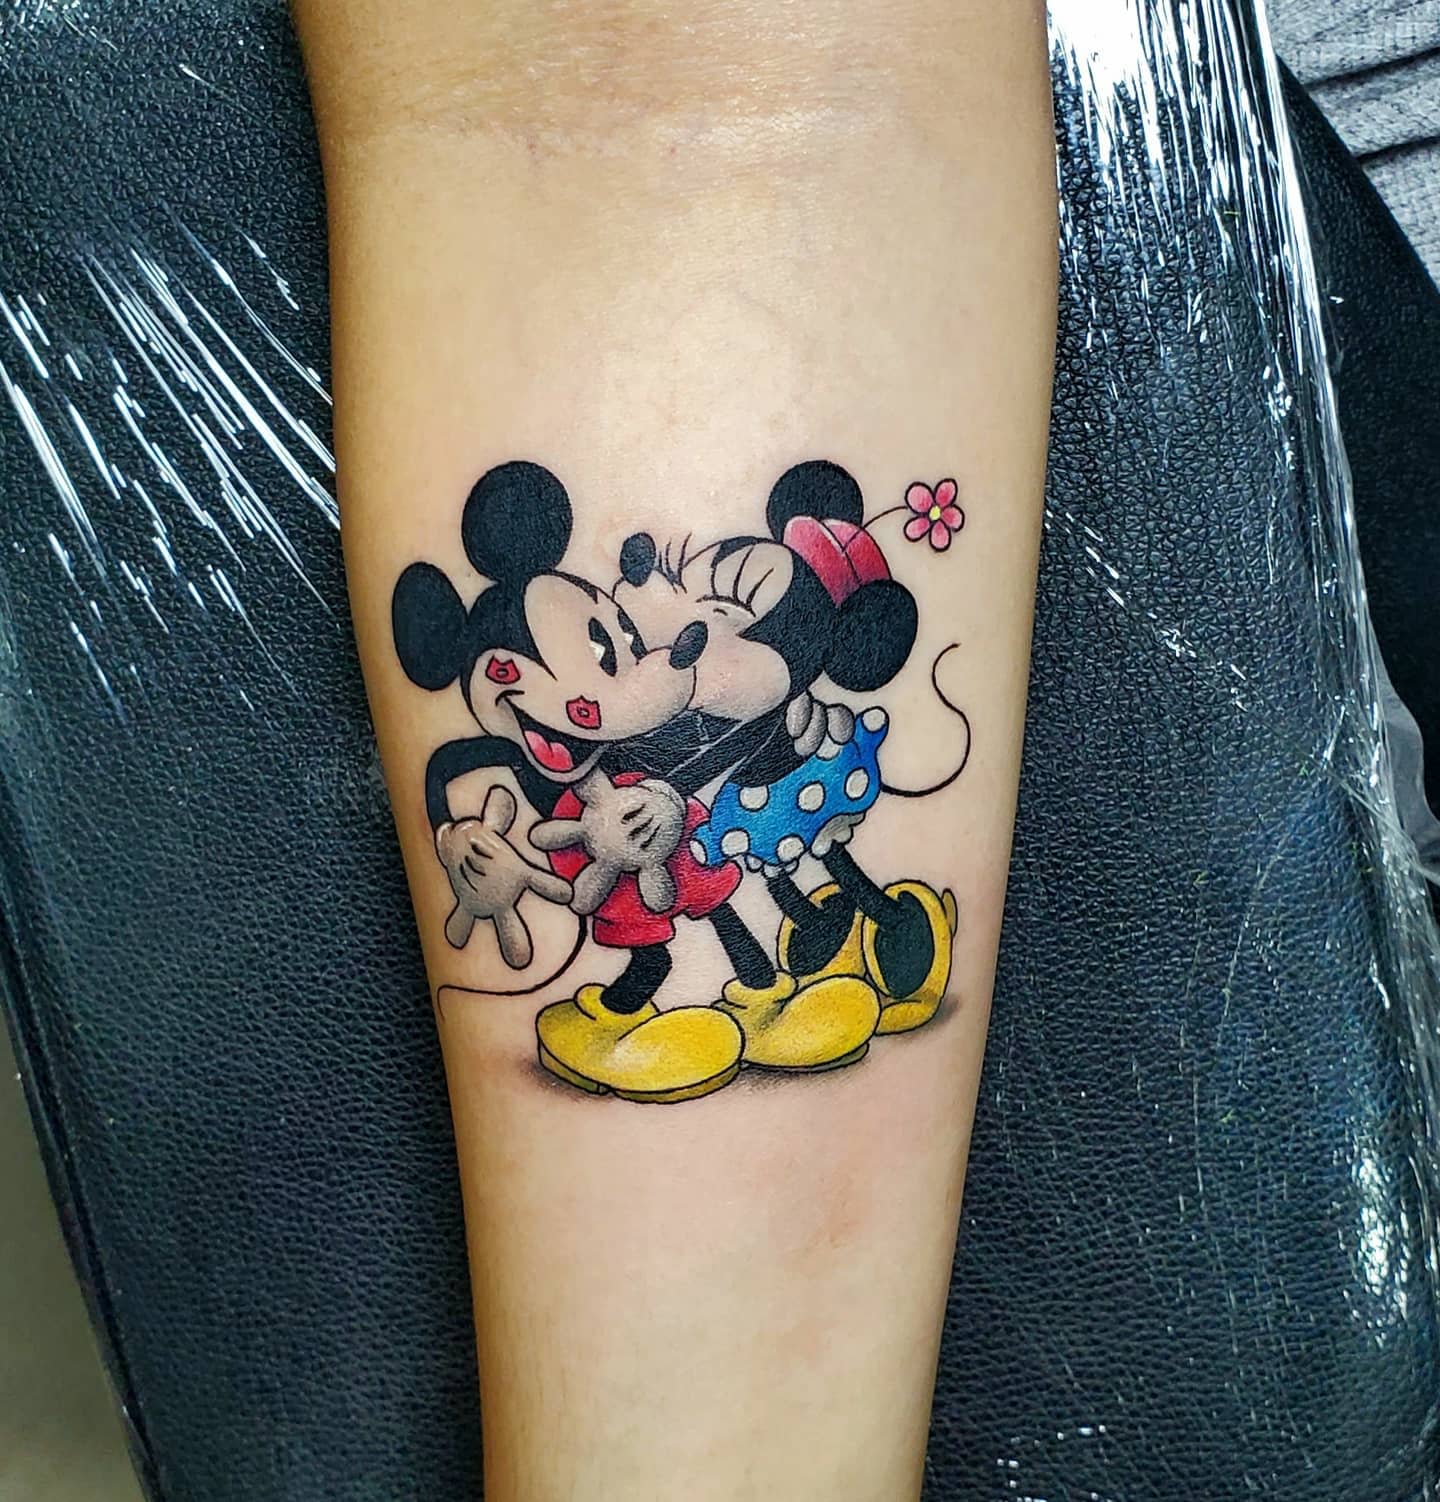 Minnie Mouse tattoo on the inner forearm. | Mouse tattoos, Mickey tattoo, Minnie  tattoo